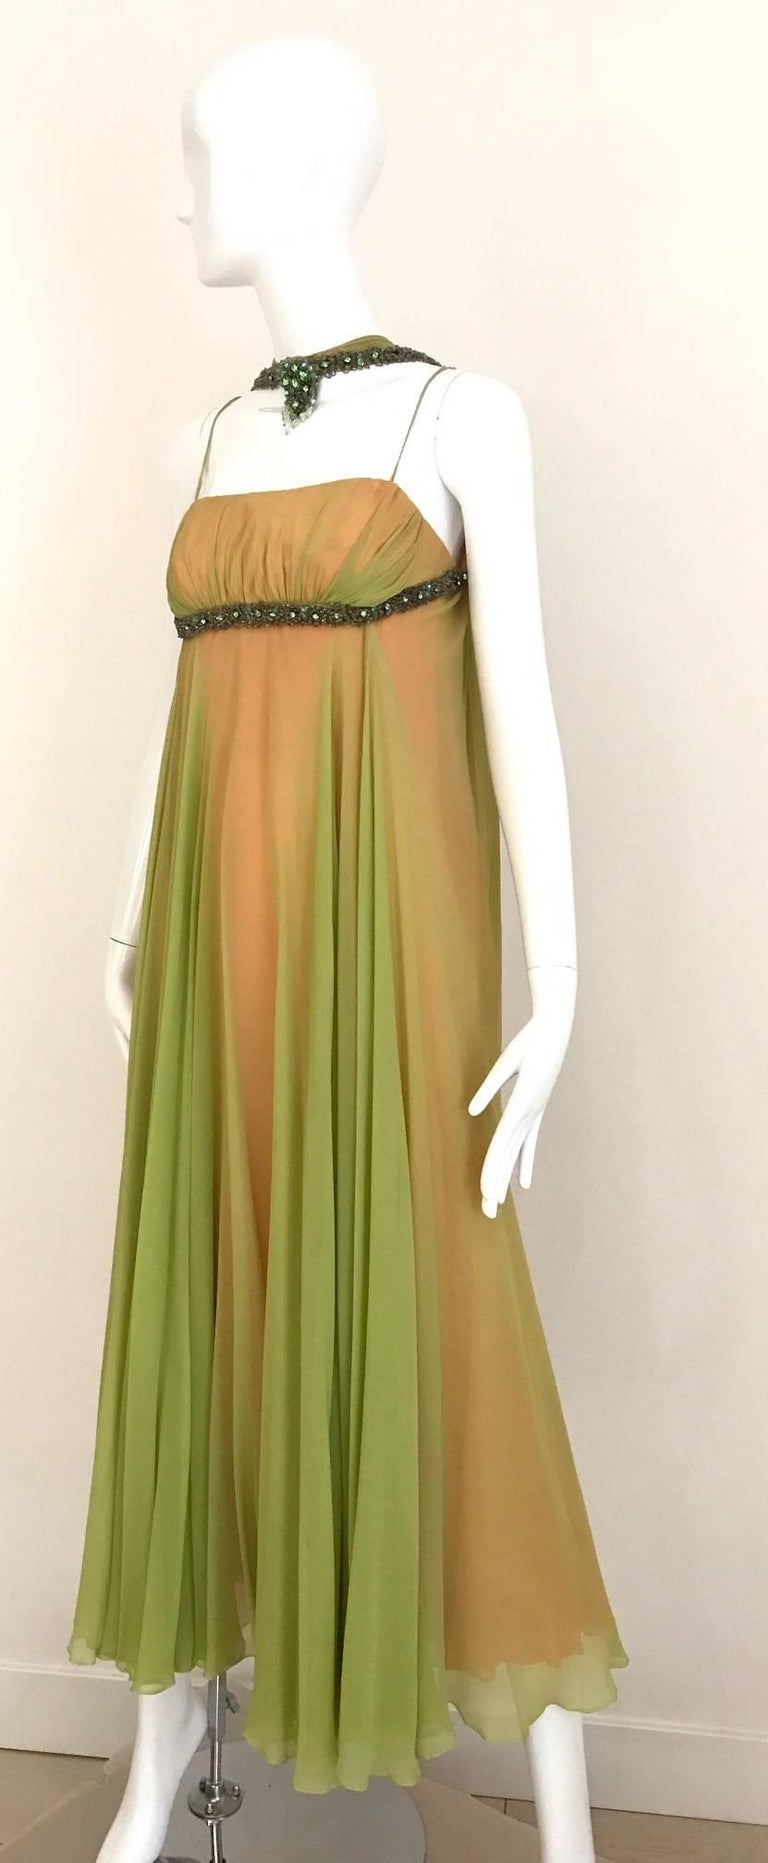 1960 Chartruese Silk Chiffon Evening Gown with Jeweled Neckline  For Sale 1